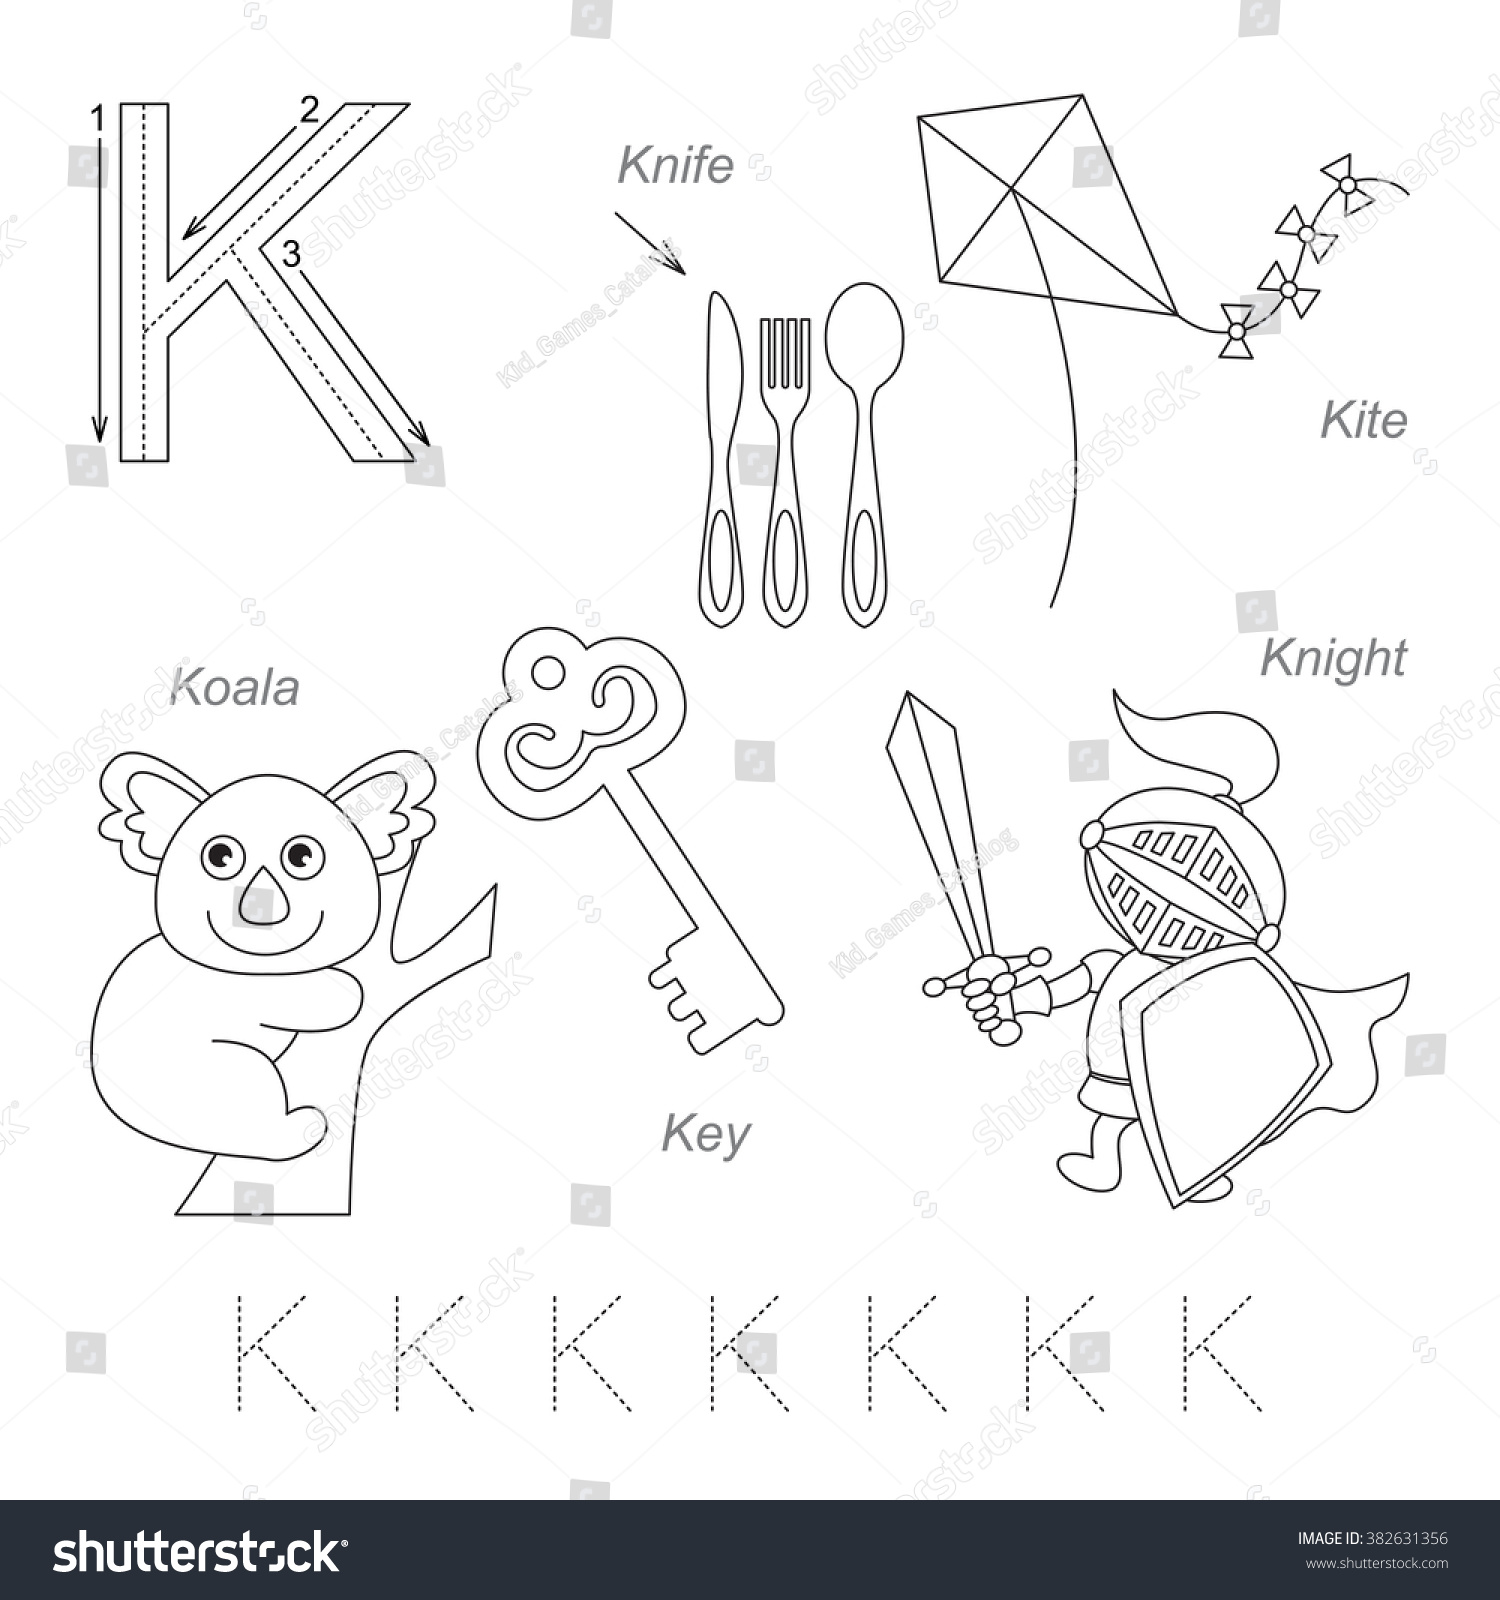 Tracing Worksheet For Children. Full English Alphabet From A To Z ...